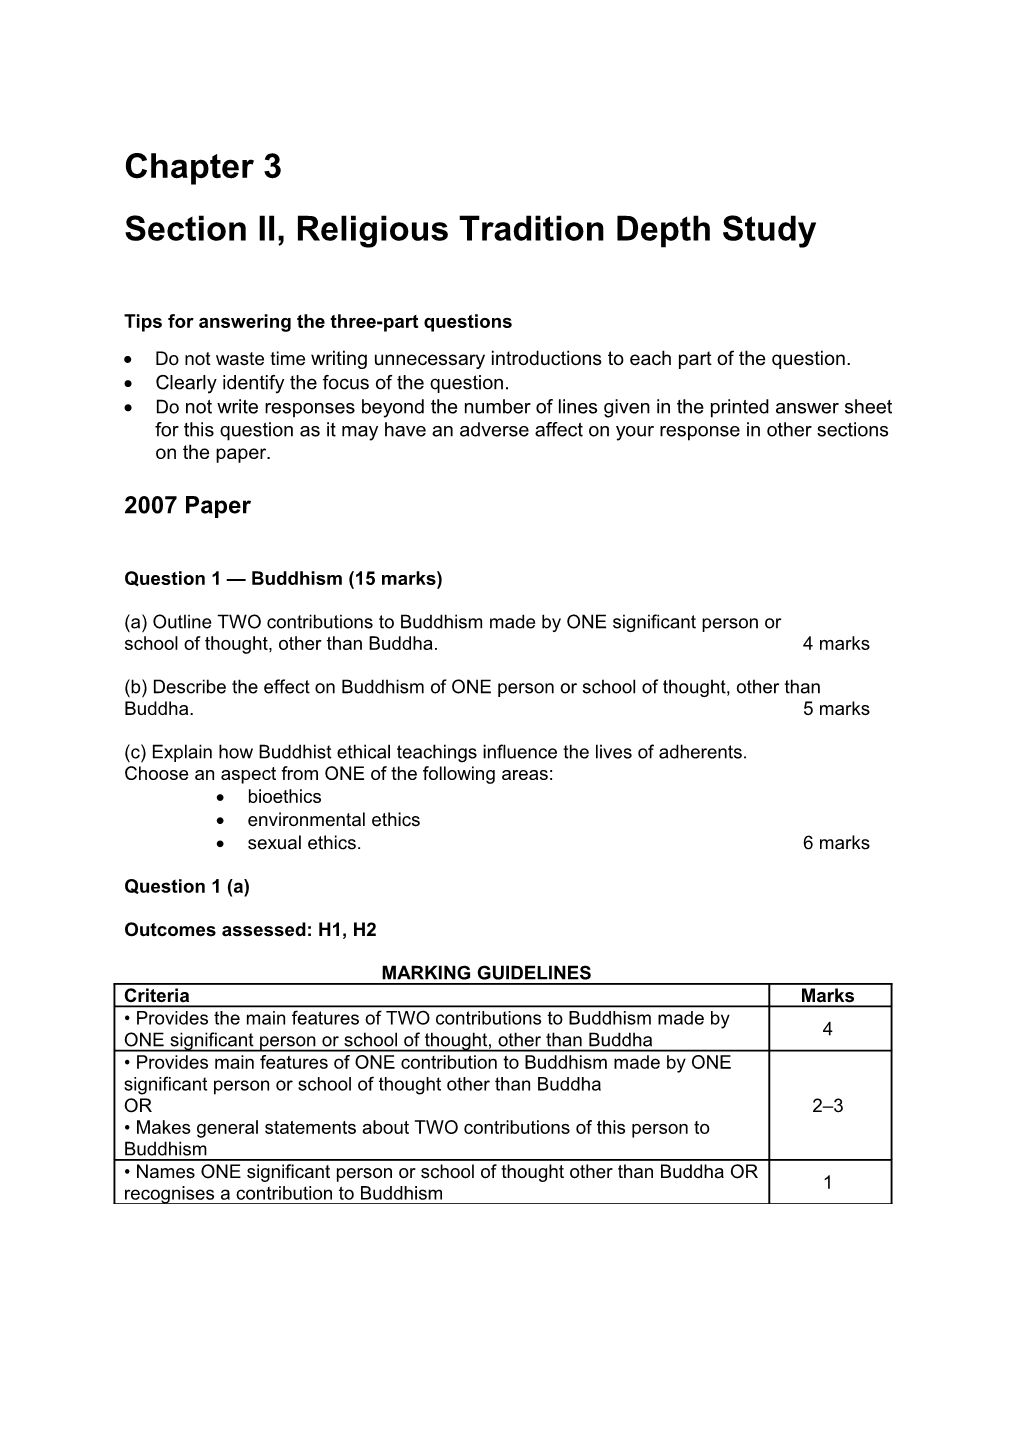 Chapter 3: Religious Tradition Depth Study 1